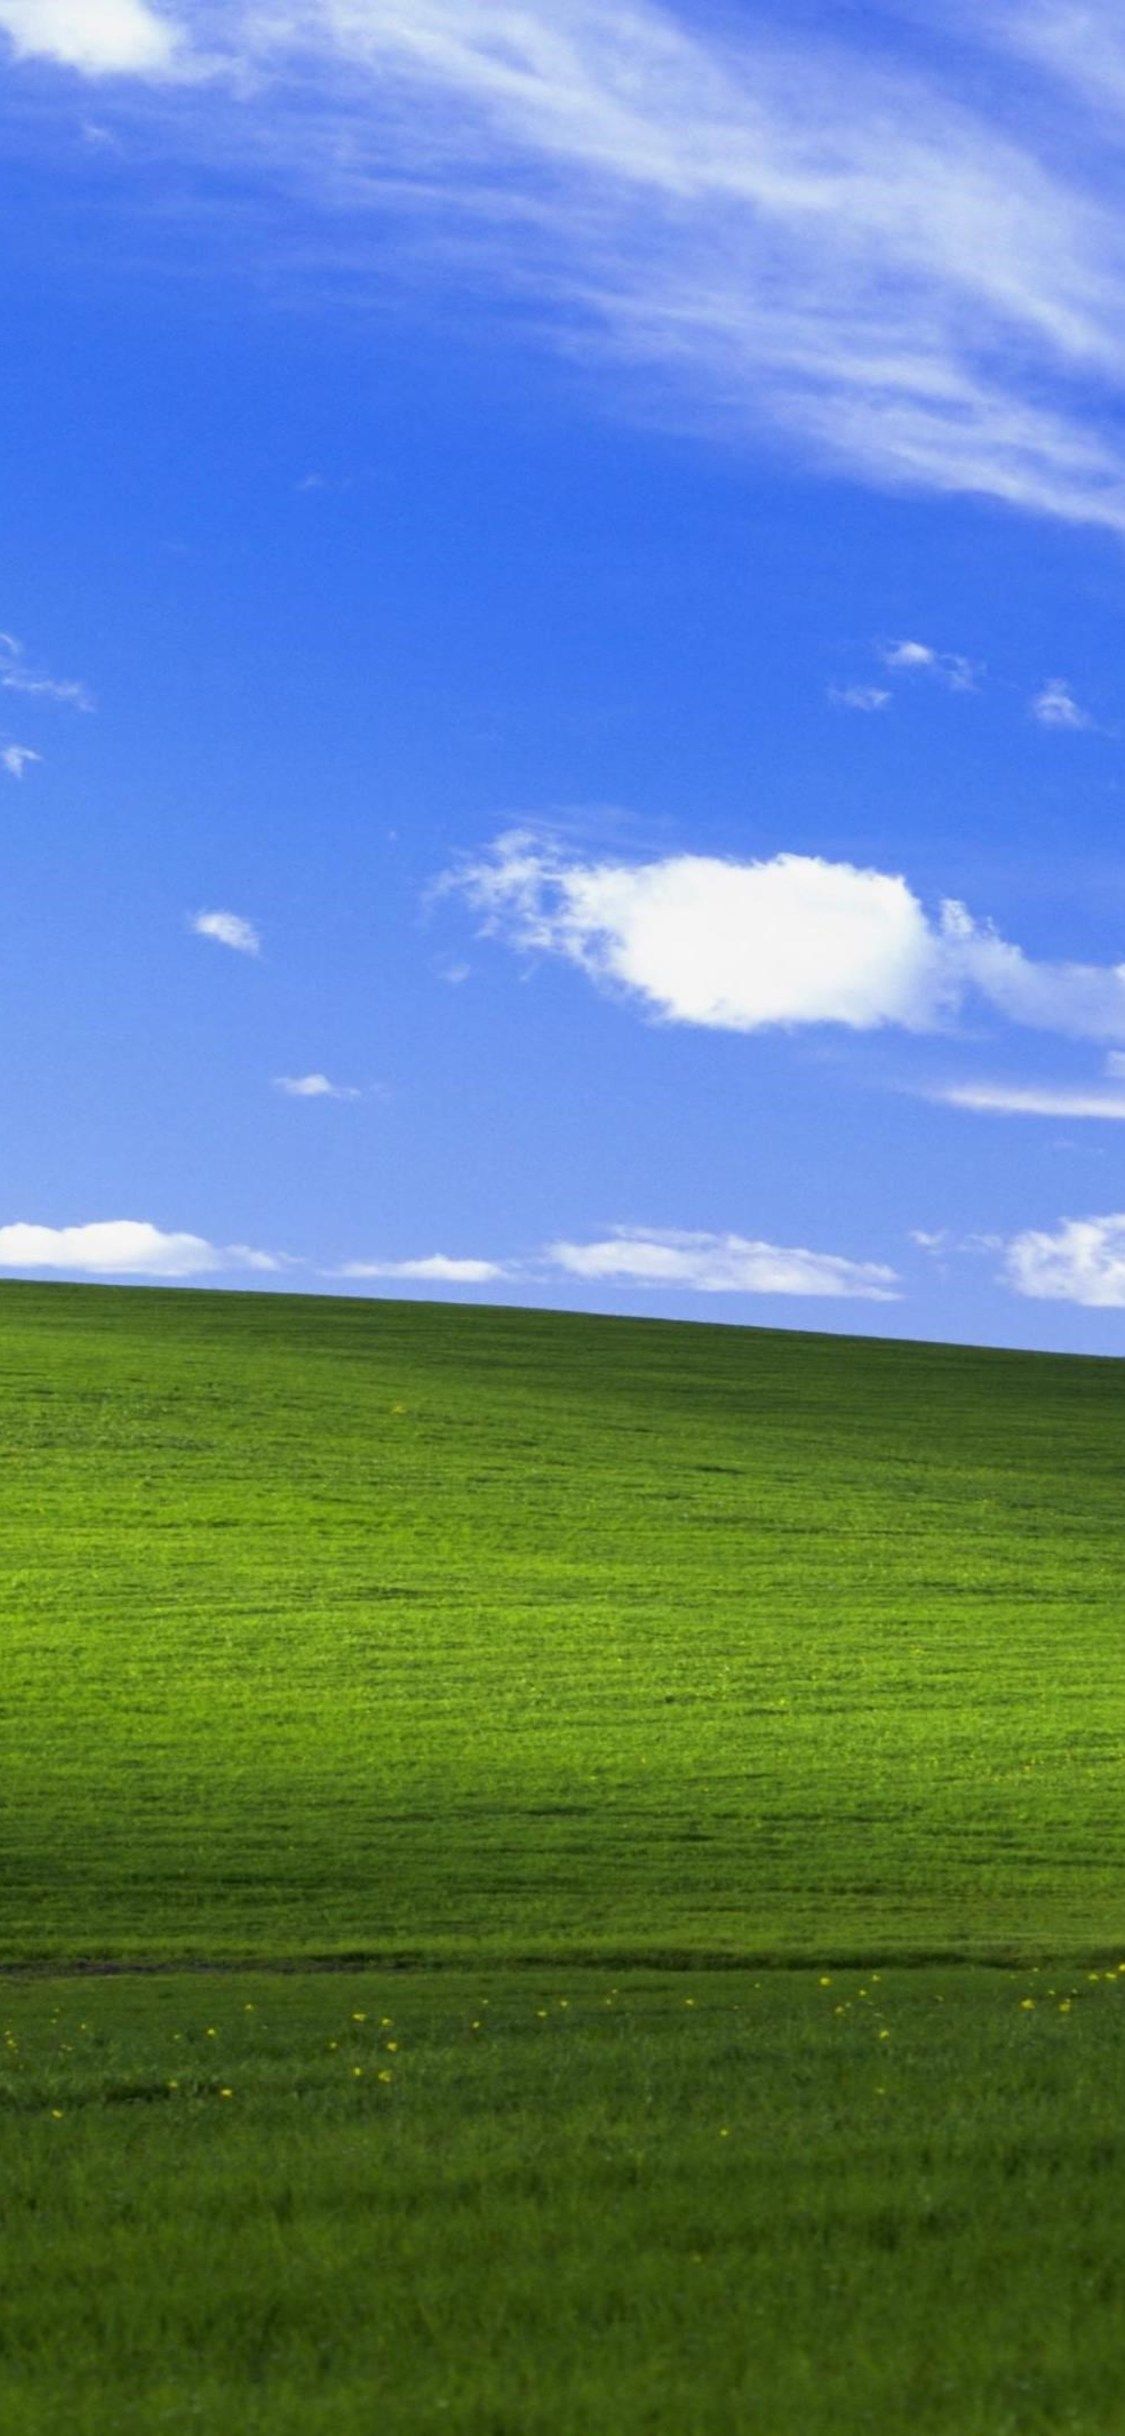 Windows Iconic Wallpaper Created in 90s Bliss Gets a Sequel   Indiacom